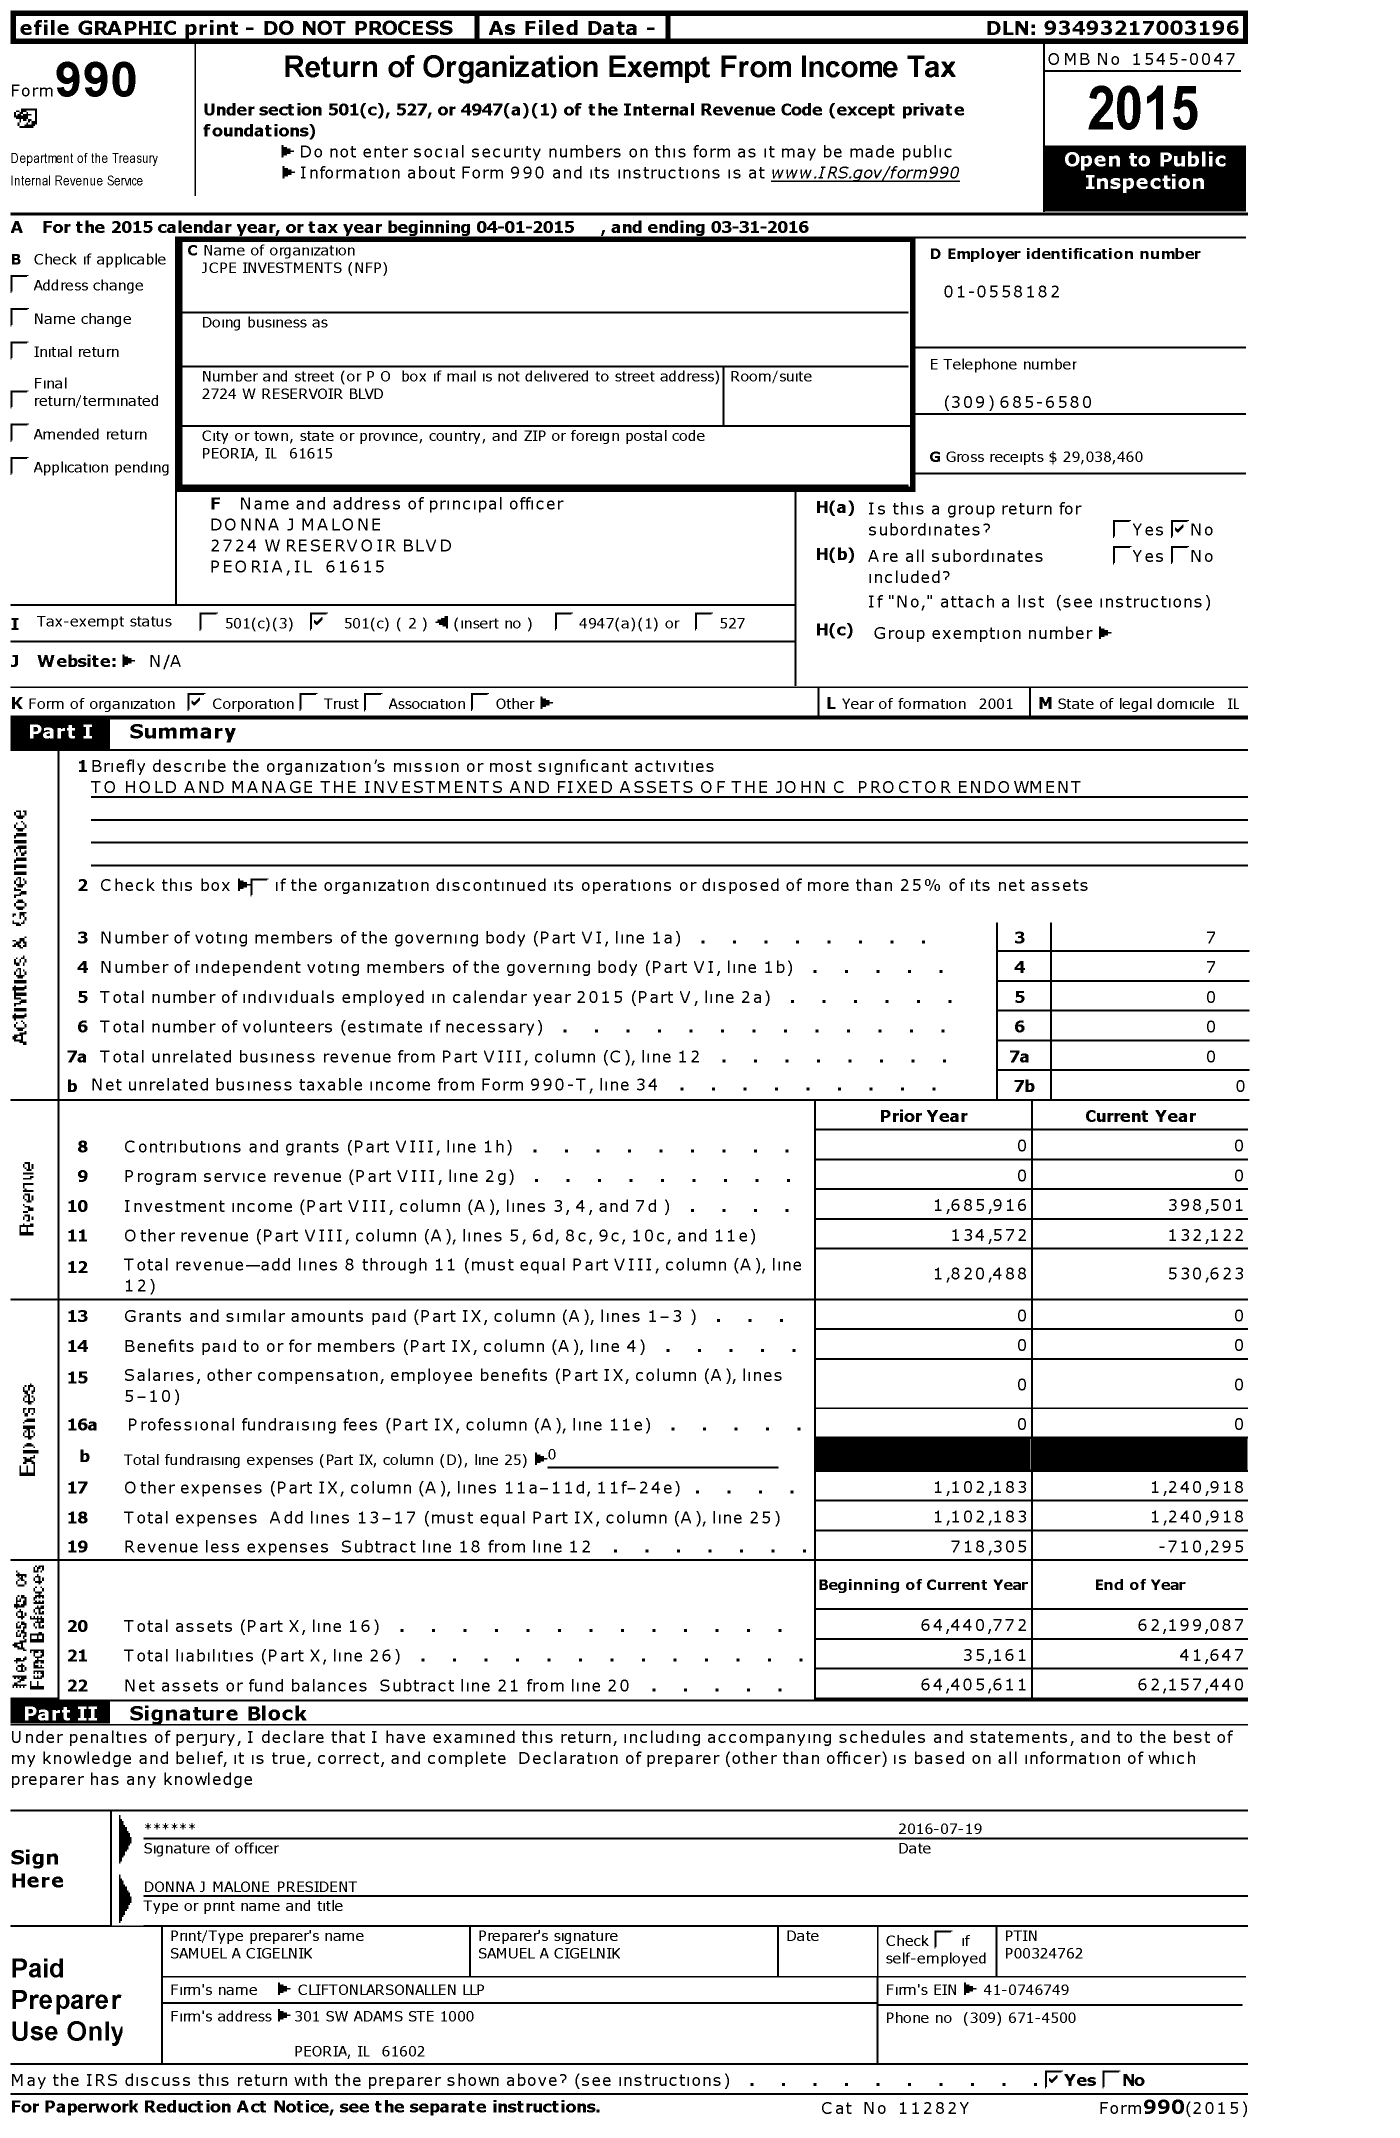 Image of first page of 2015 Form 990O for Jcpe Investments